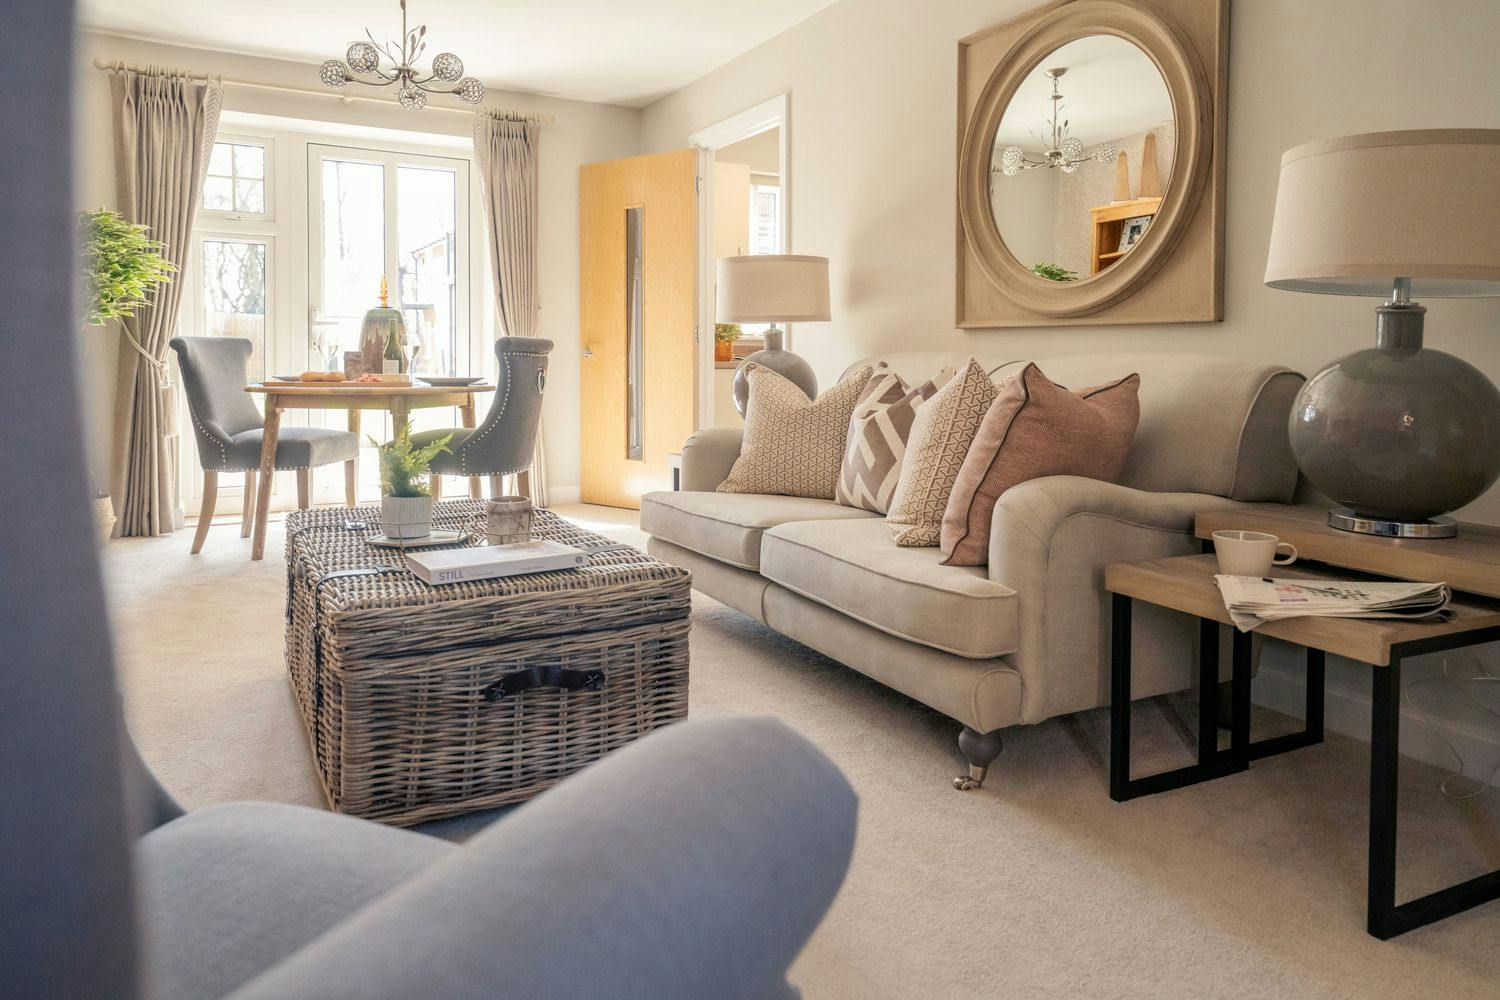 Living Room at Somers Brook Court Retirement Development in Newport, Isle of Wight